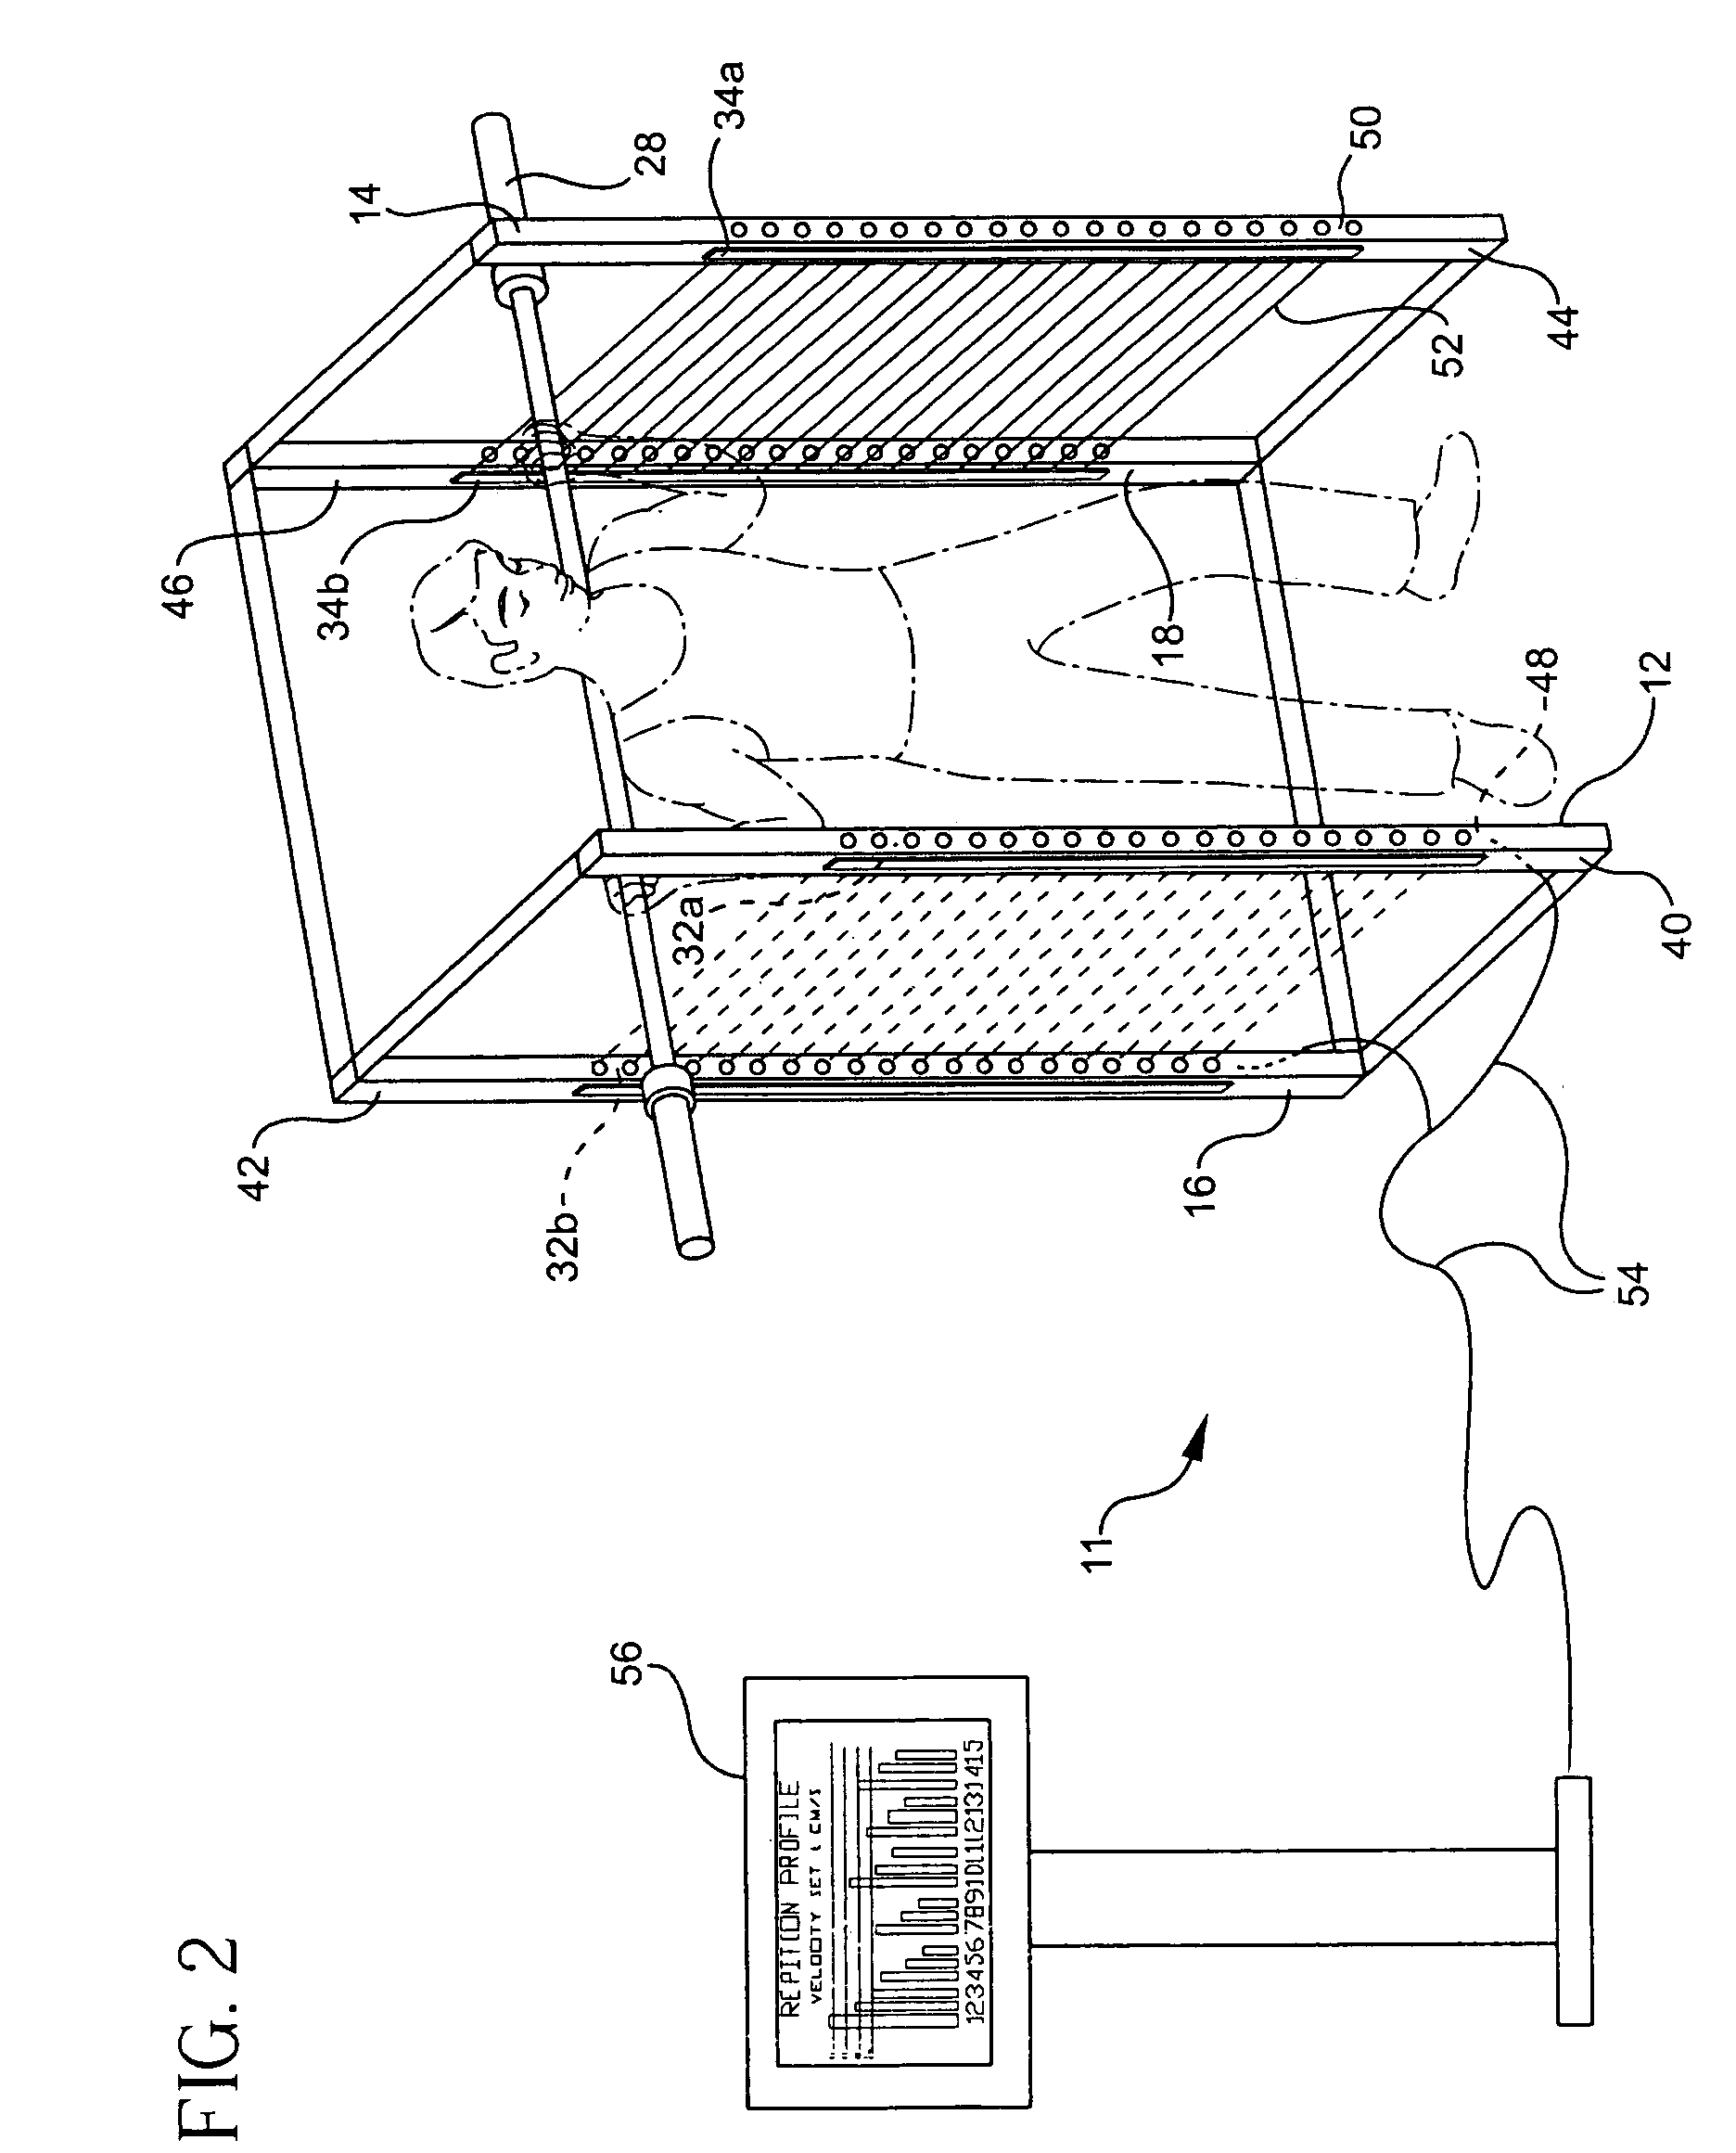 Free-weight exercise monitoring and feedback system and method